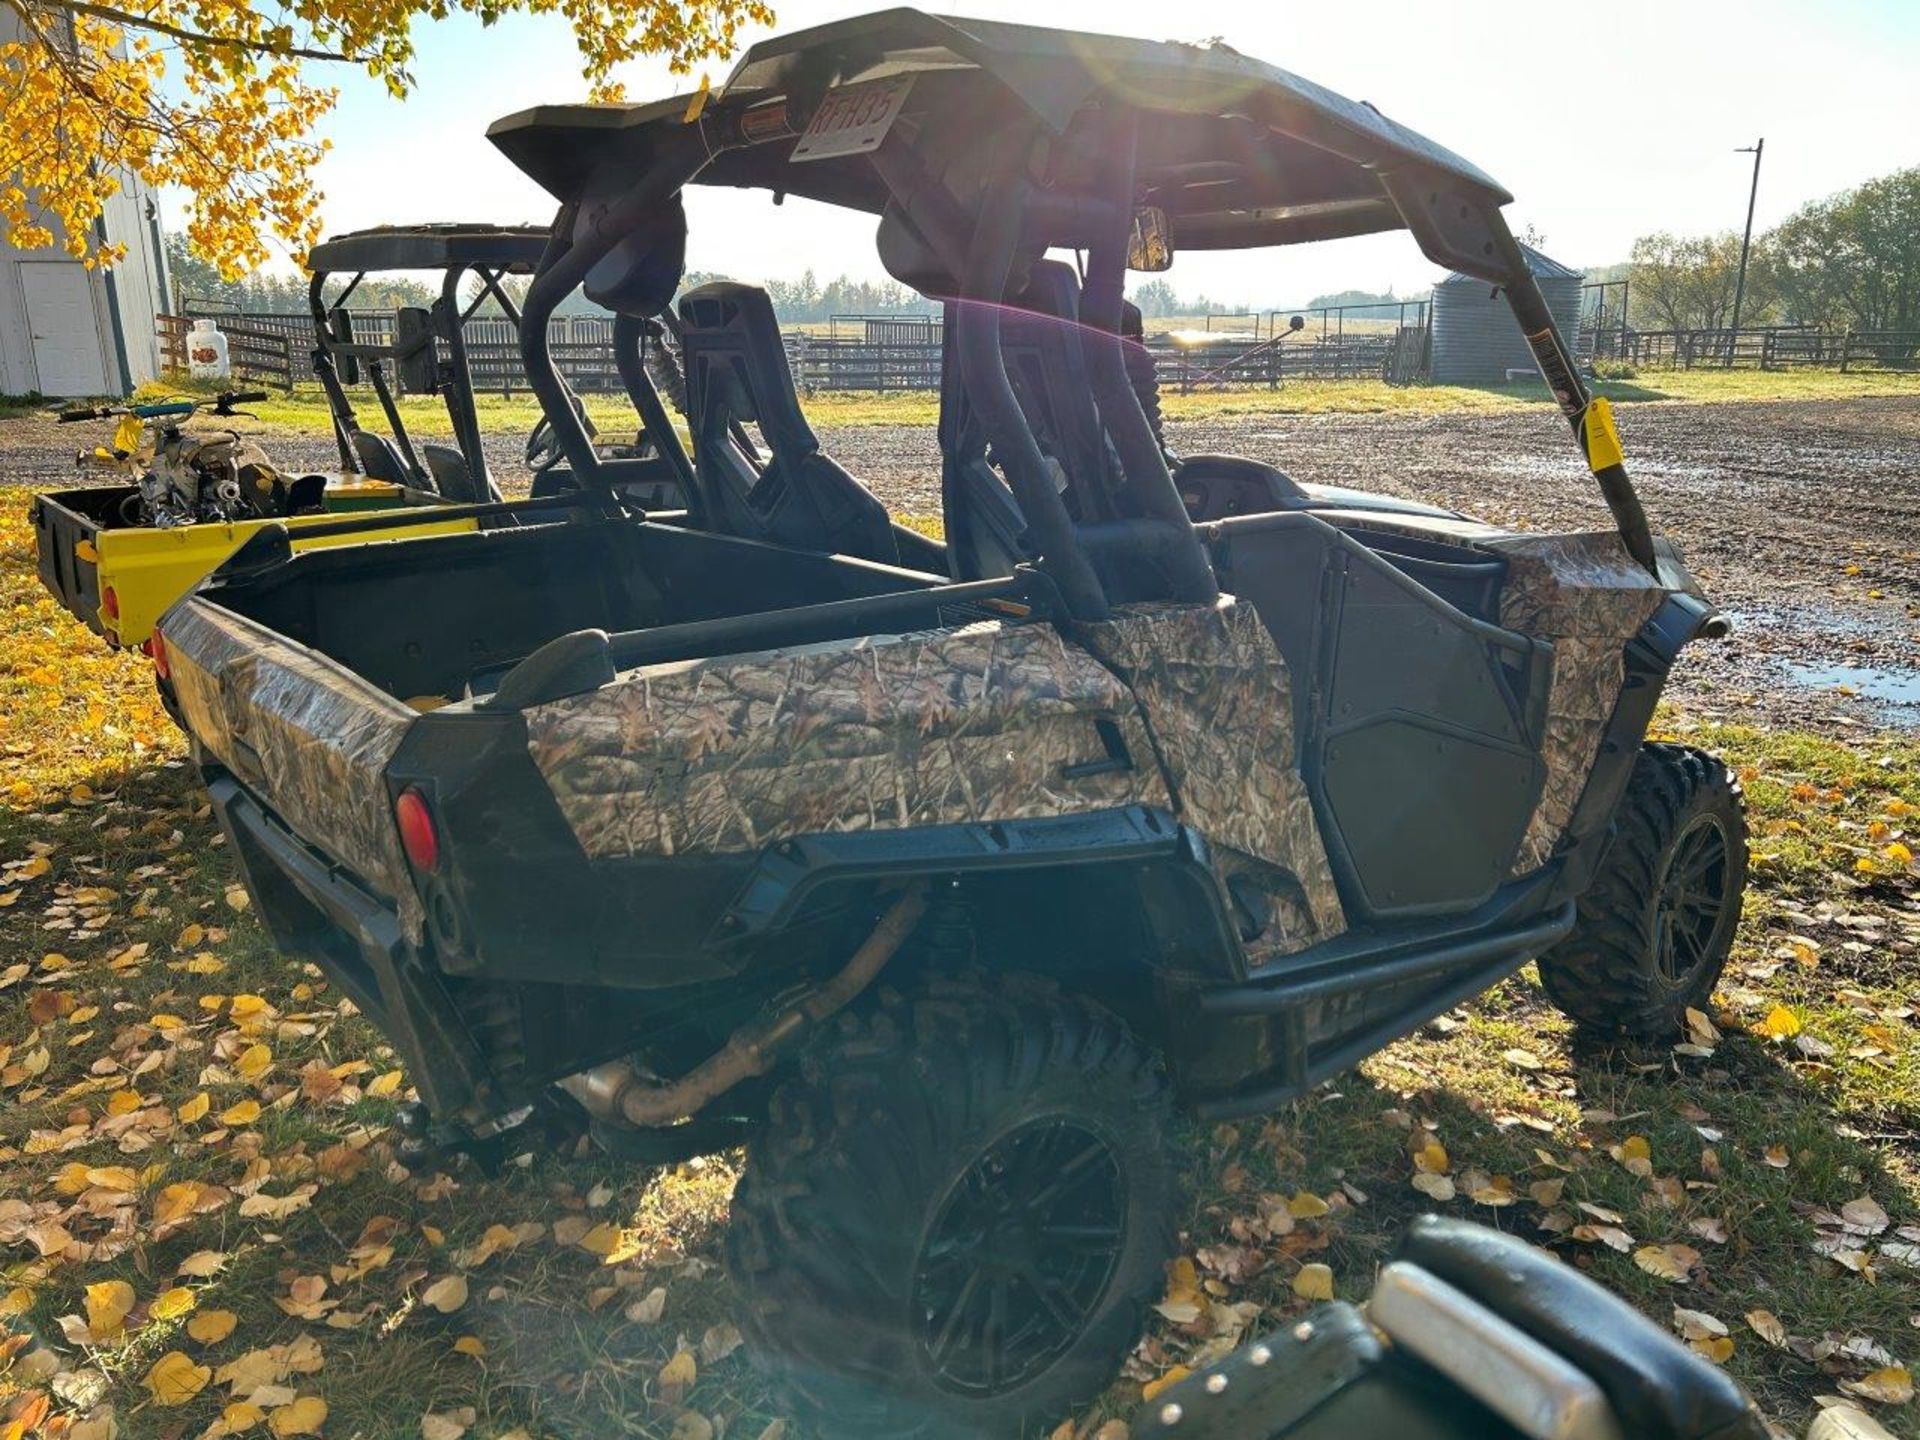 **LOCATED AT MAS** 2012 CAN AM COMMANDER XT ATV, 1000 CC, DUMP BOX, ROOF, NEW BRAKES, WHEEL BNGS, FU